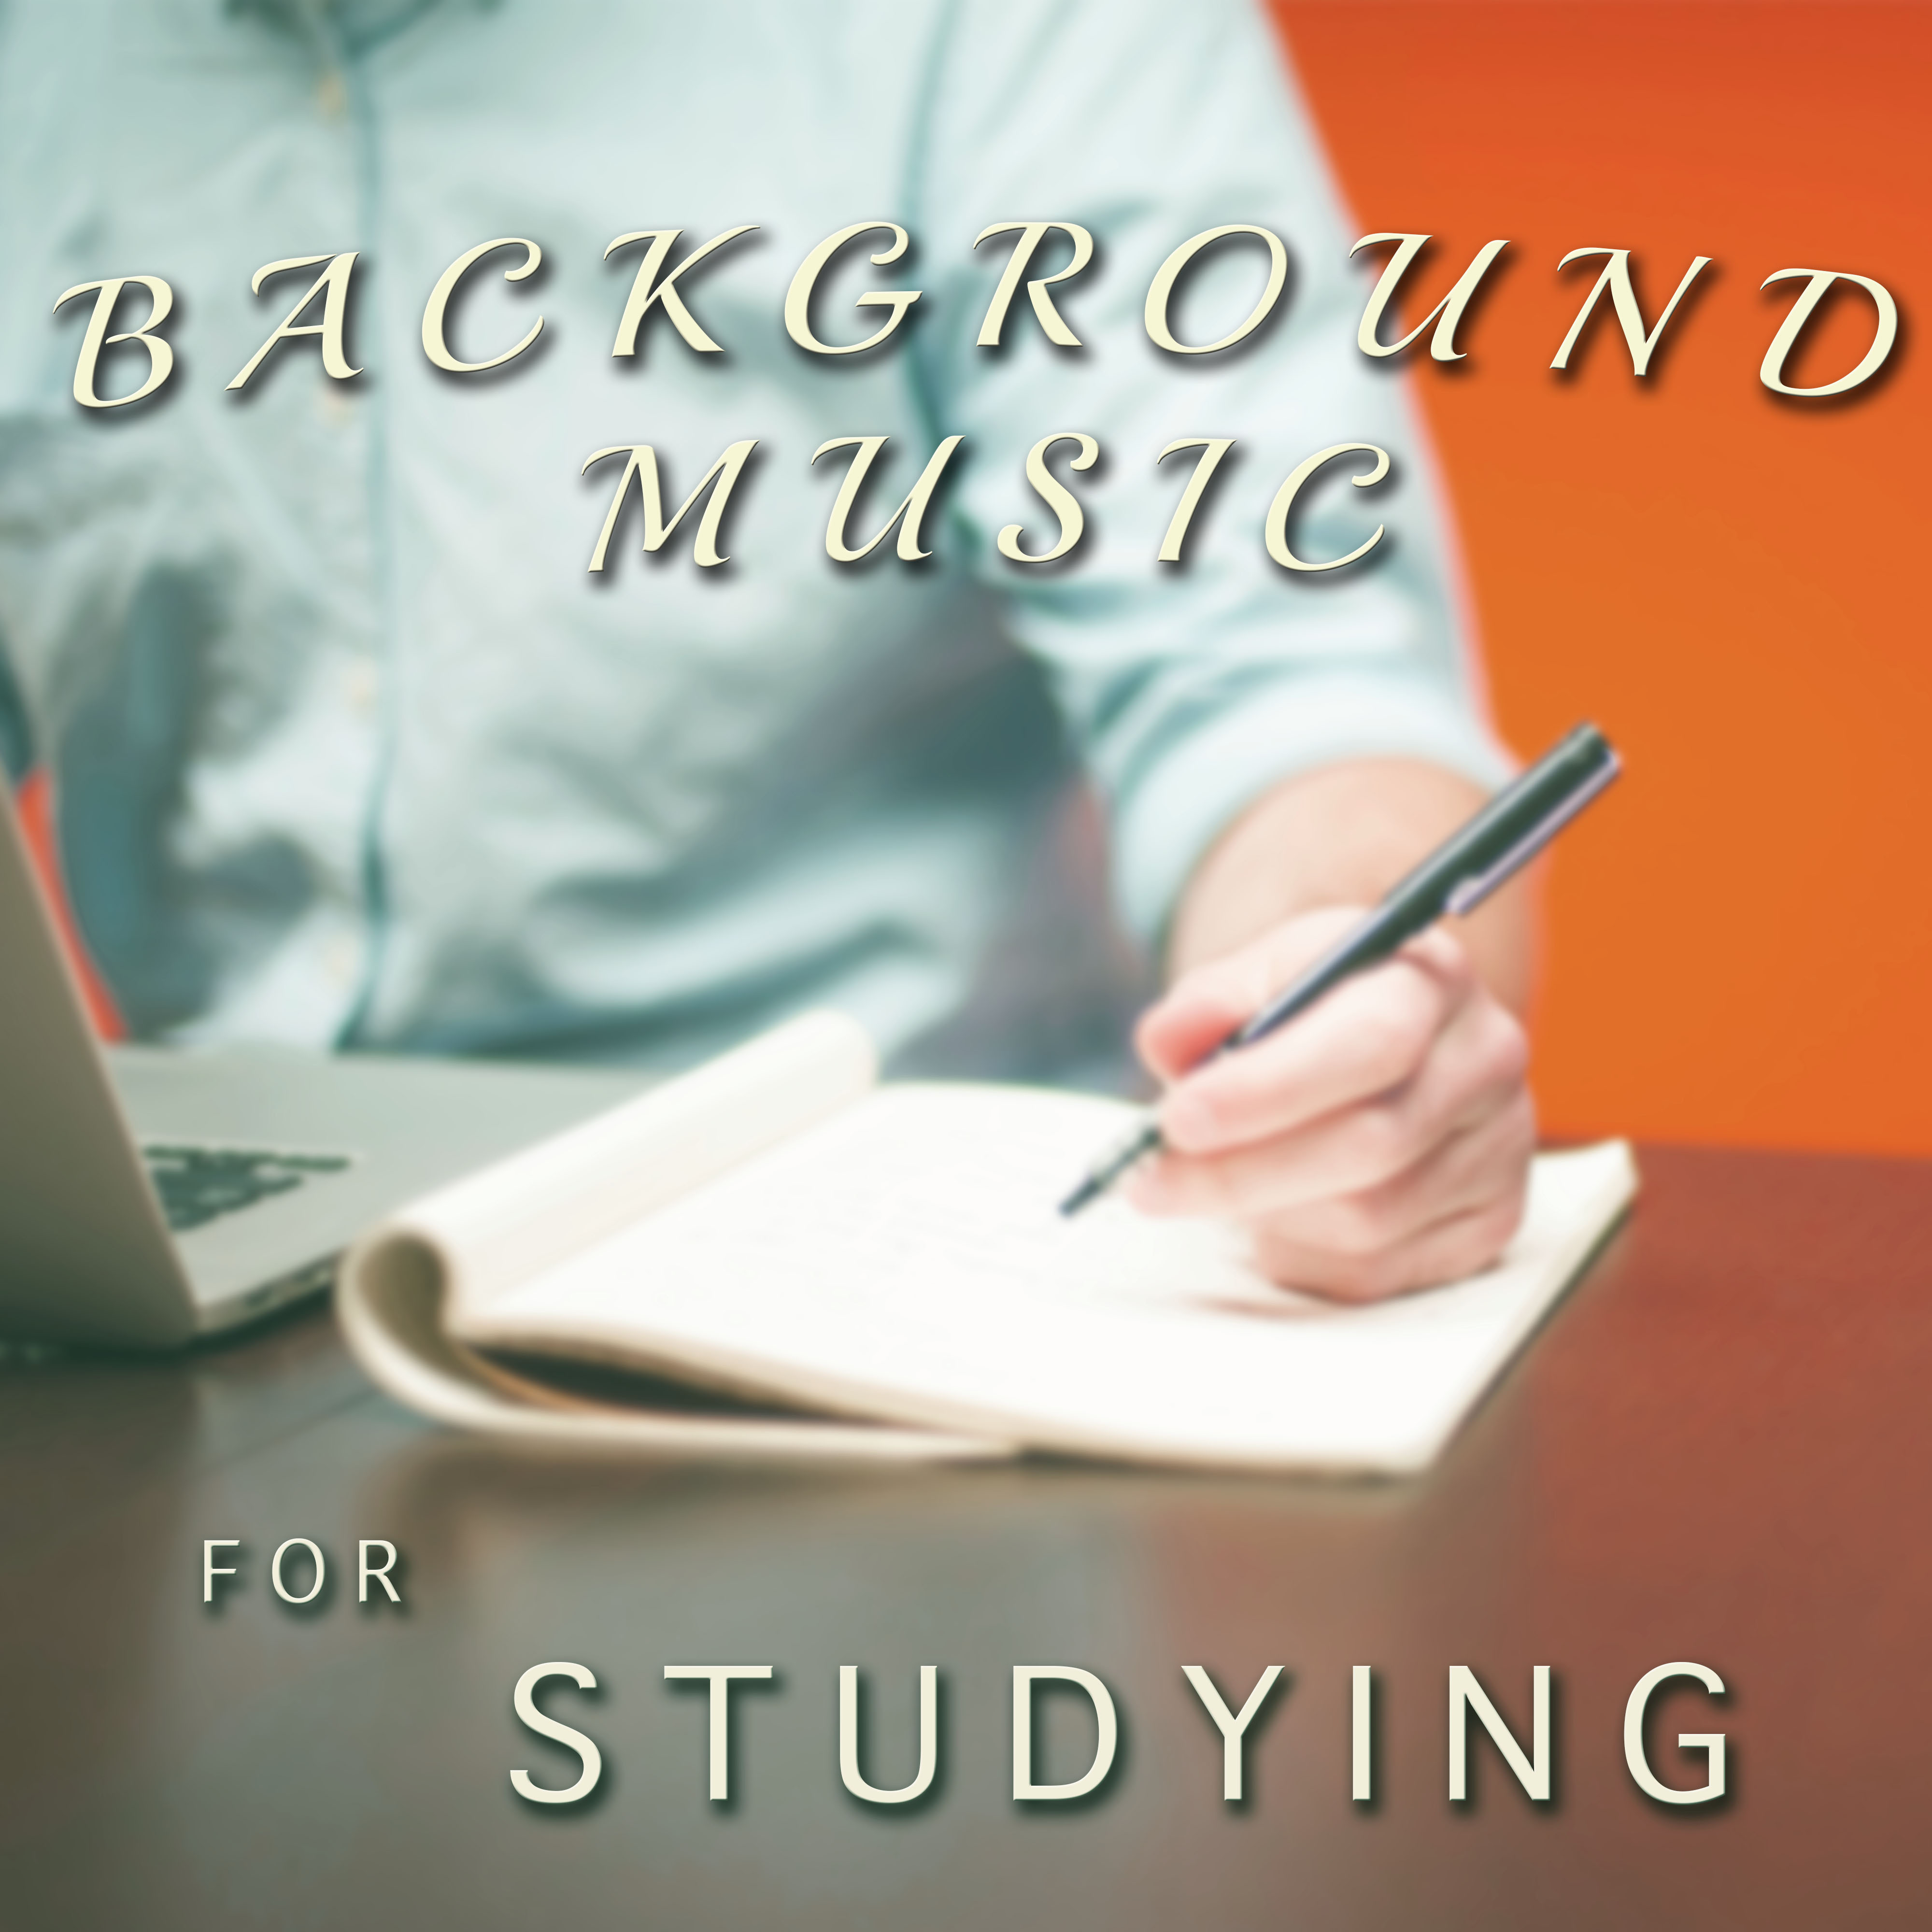 Background Music for Studying - Best Playlist to Seek Concentration